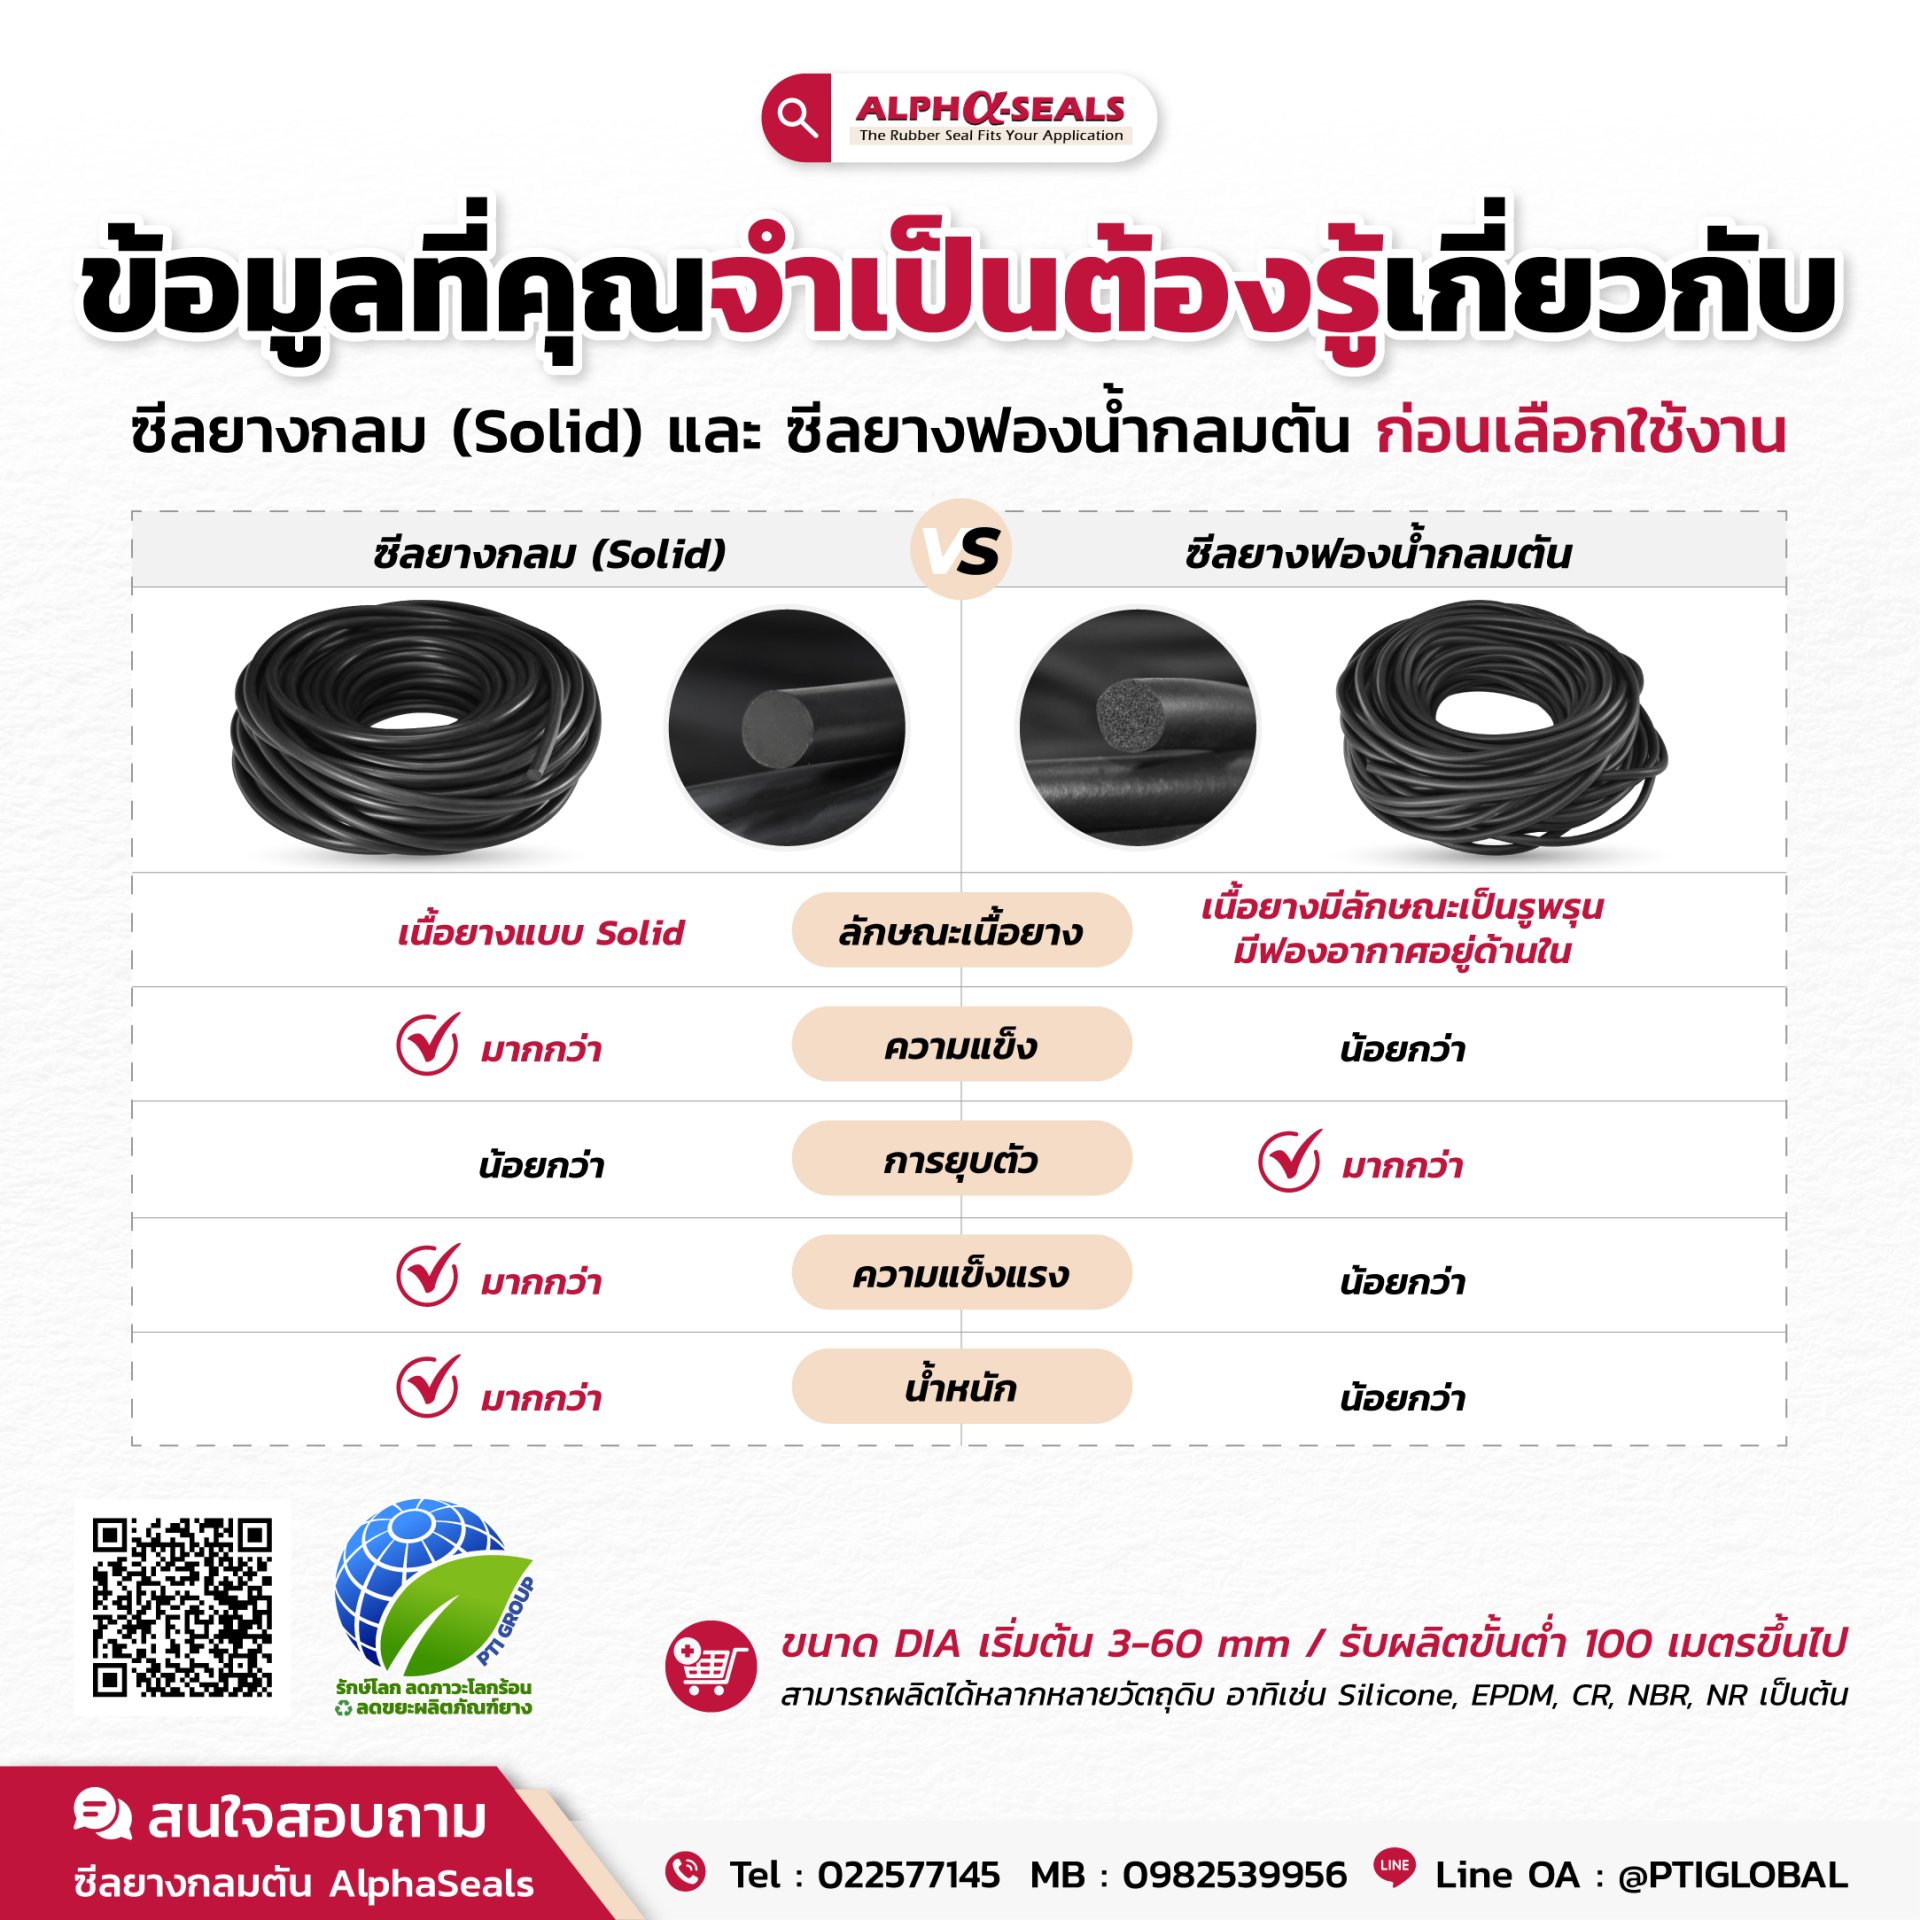 Information you need to know about solid rubber seals and solid rubber sponge seals. before choosing to use